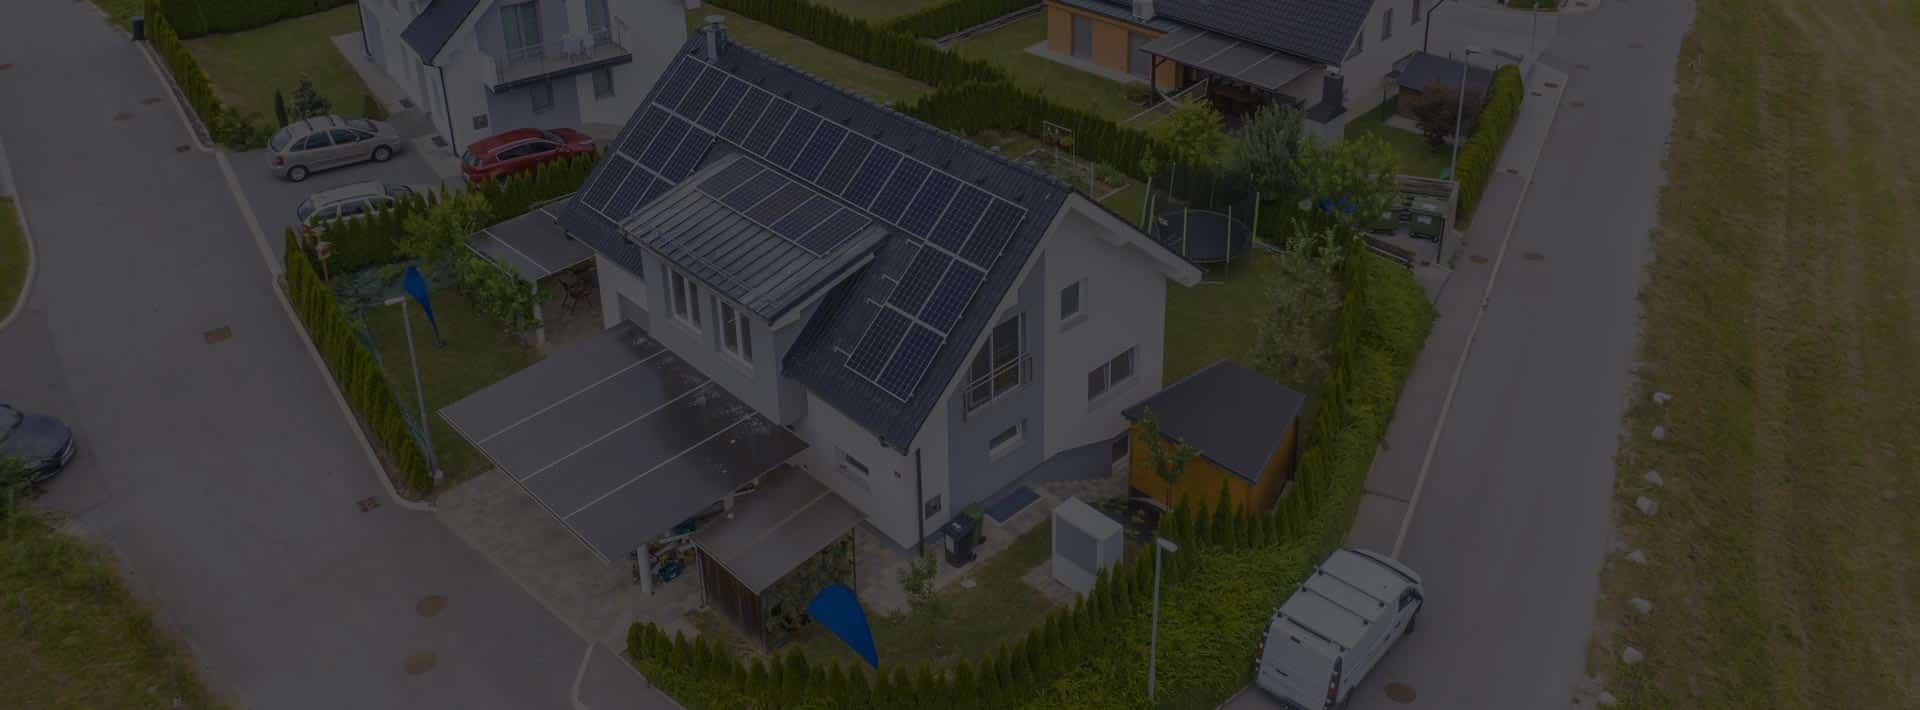 residential house with solar panels and ev charger